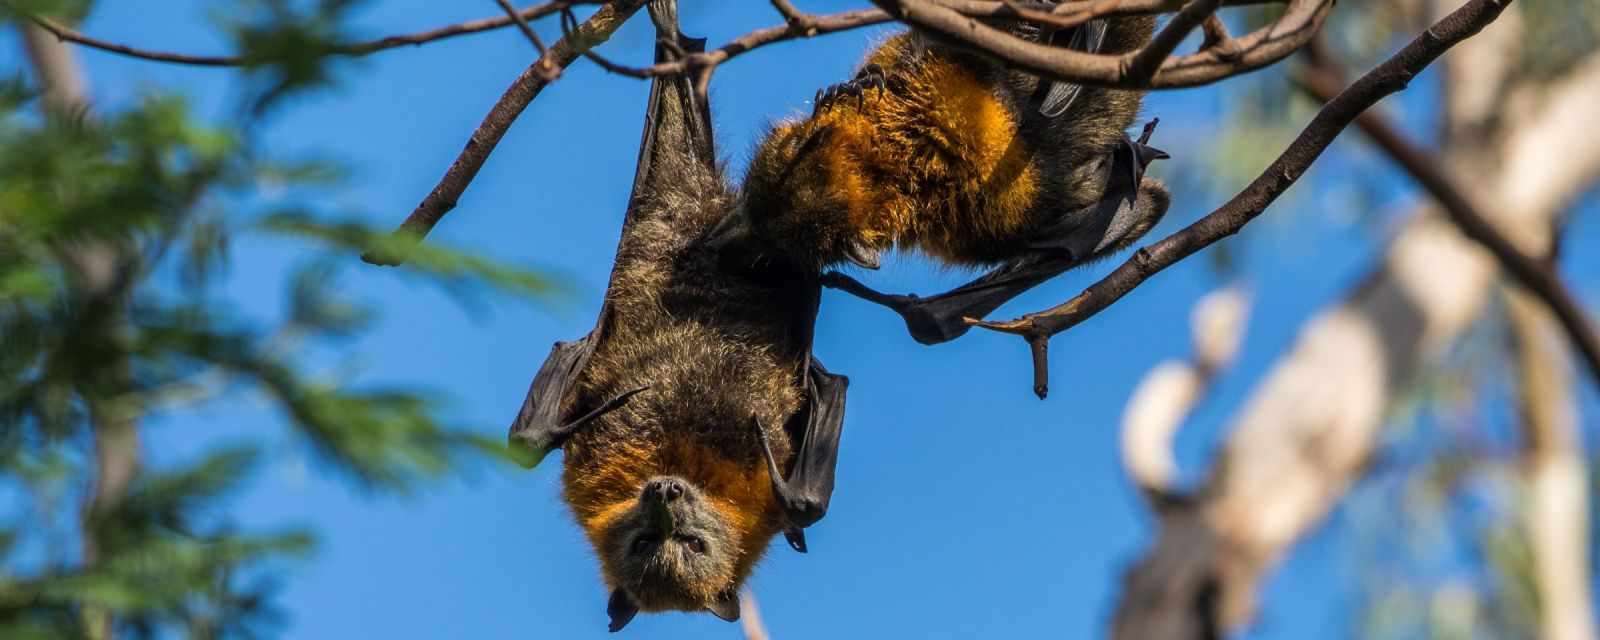 Flying Foxes, the Bat Colony at Yarra Bend Close to Melbourne